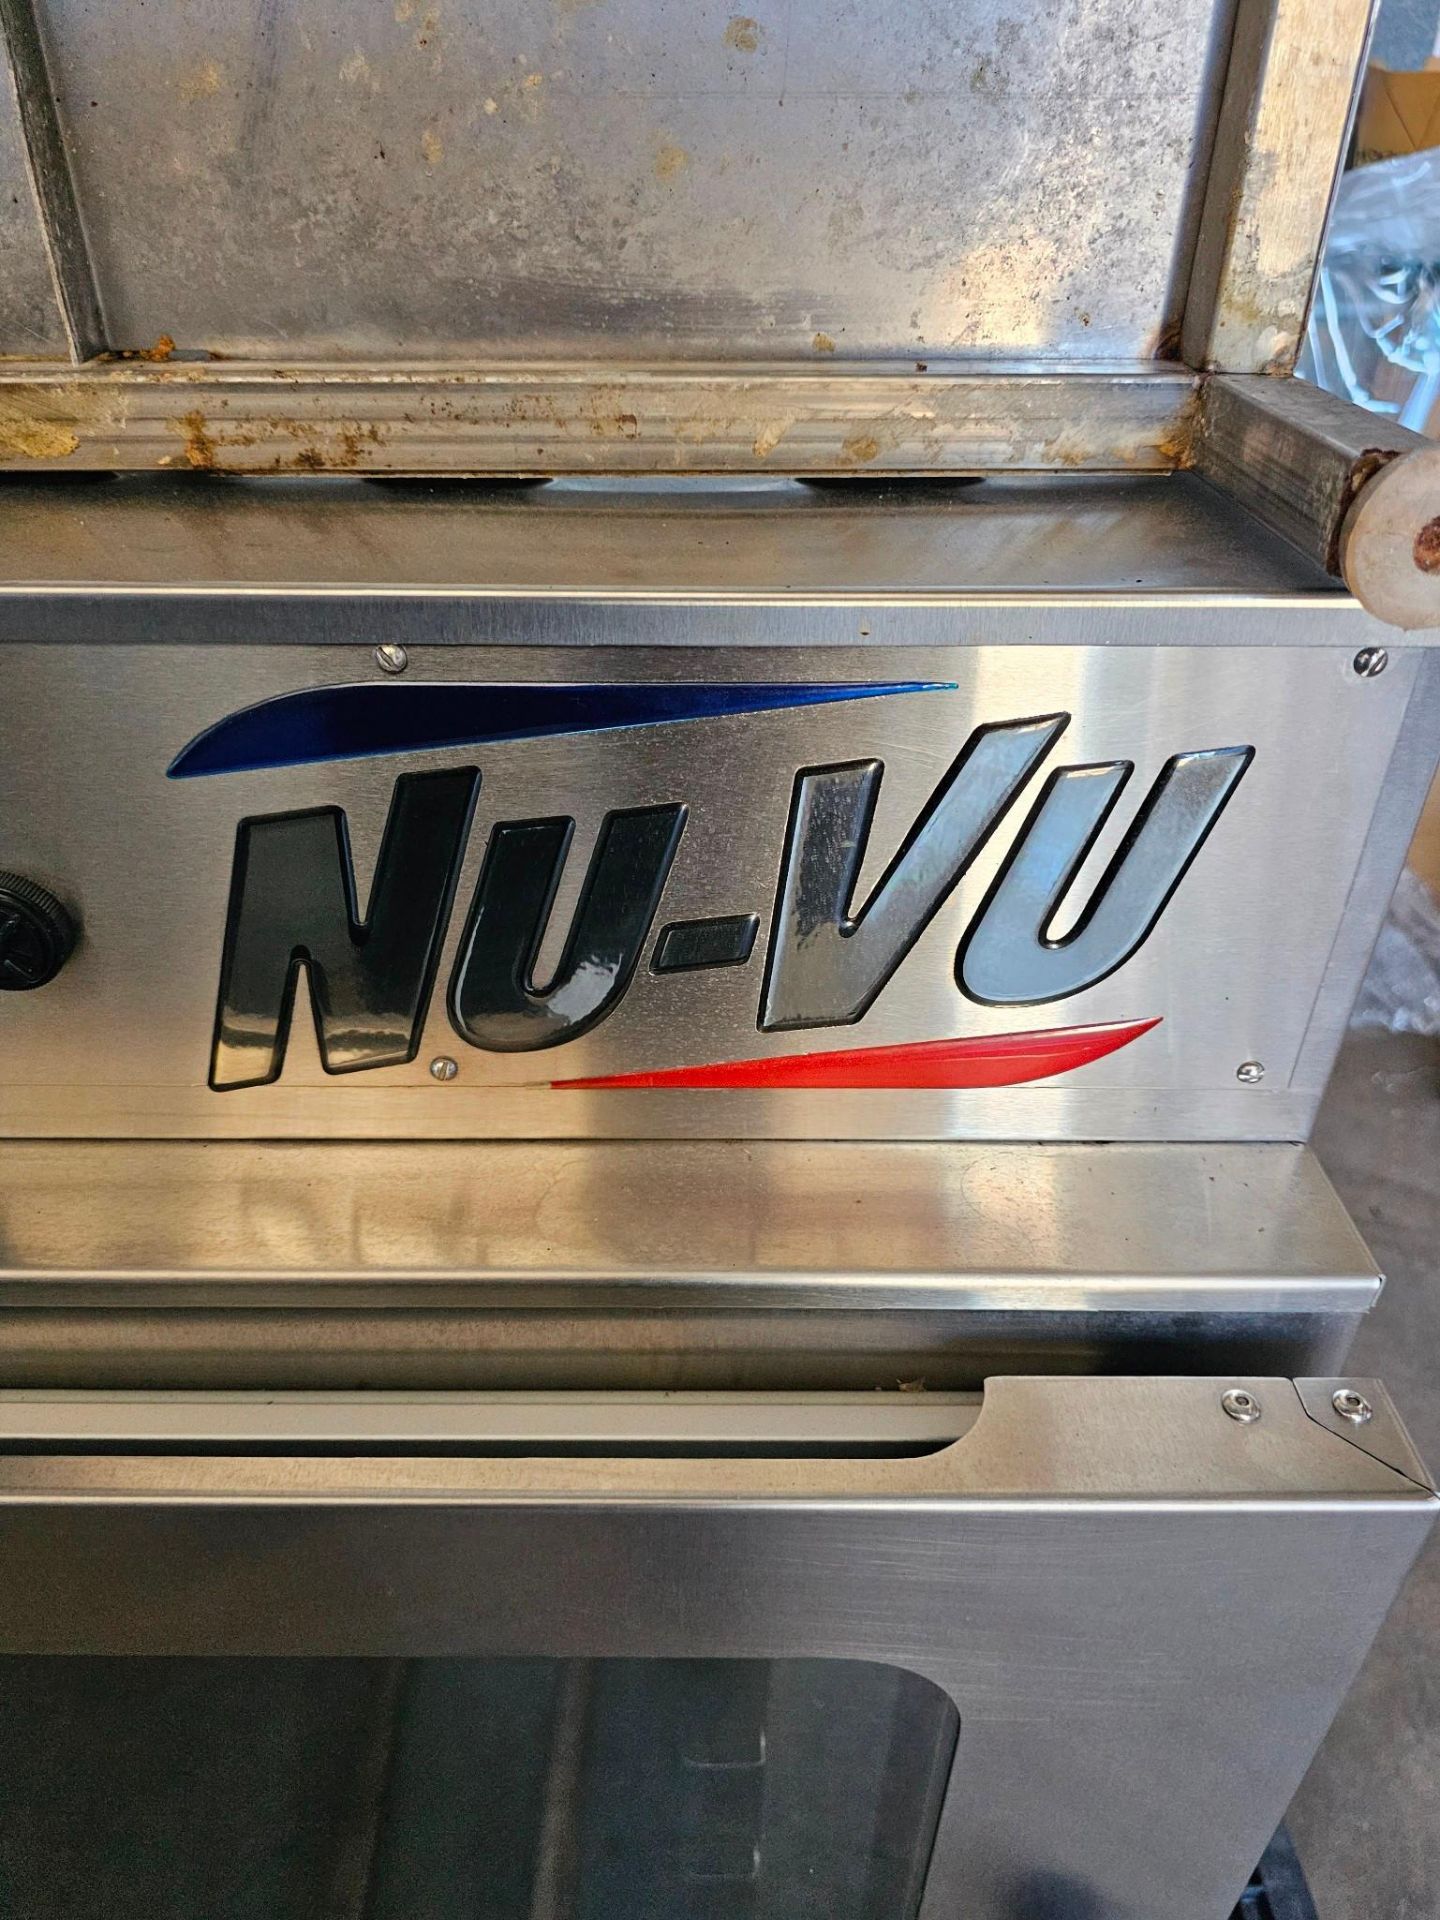 NU-VU RM-5T CONVECTION OVEN - Image 7 of 12